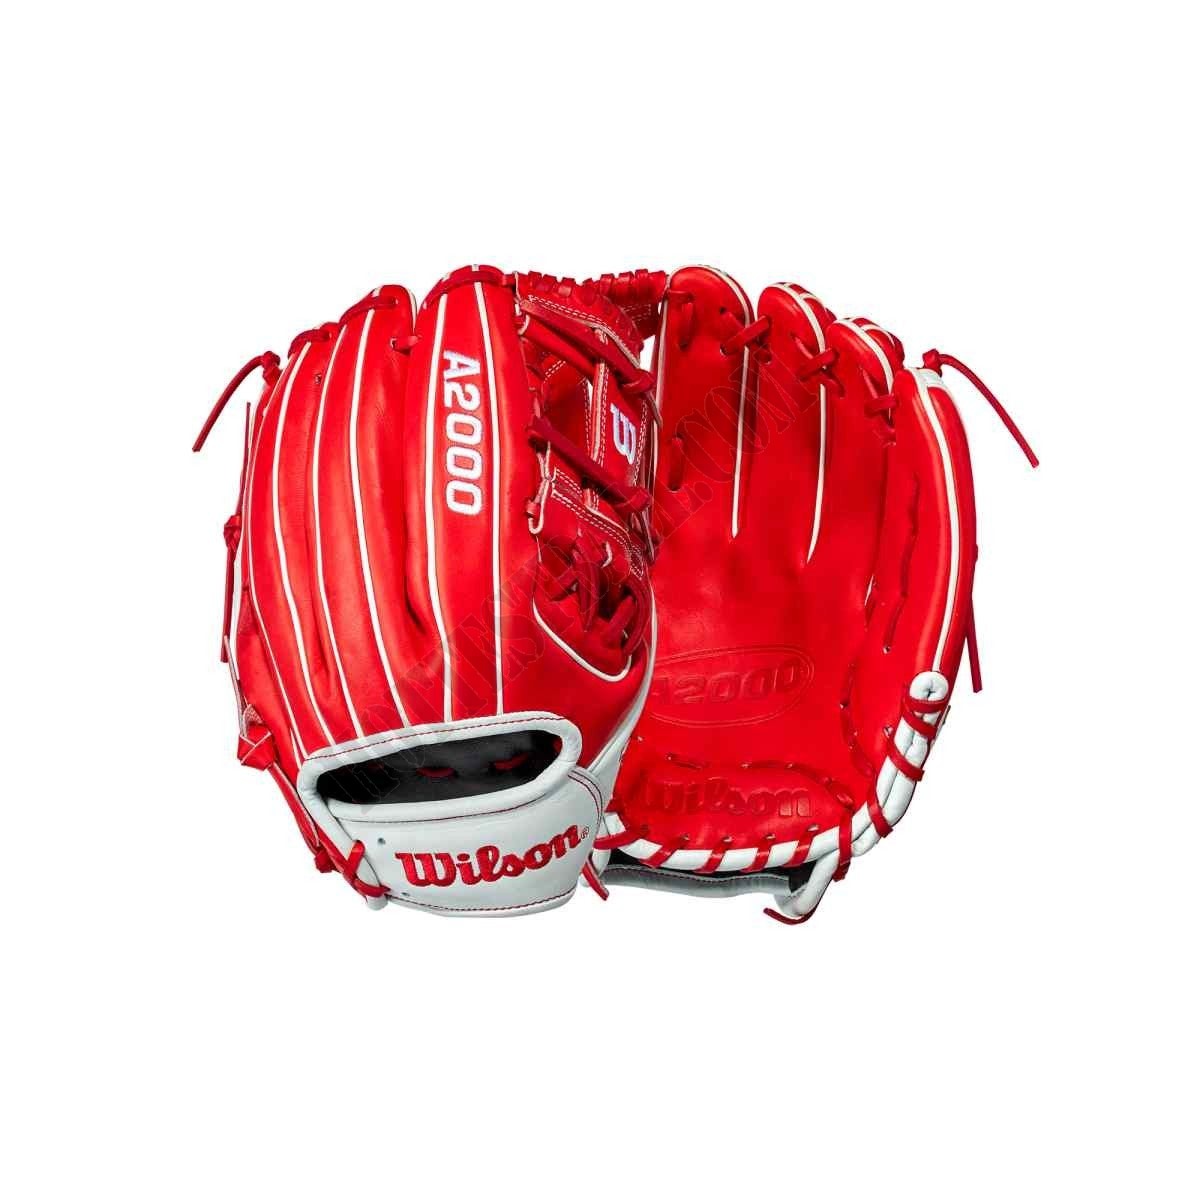 2021 A2000 1786 Canada 11.5" Infield Baseball Glove - Limited Edition ● Wilson Promotions - -0